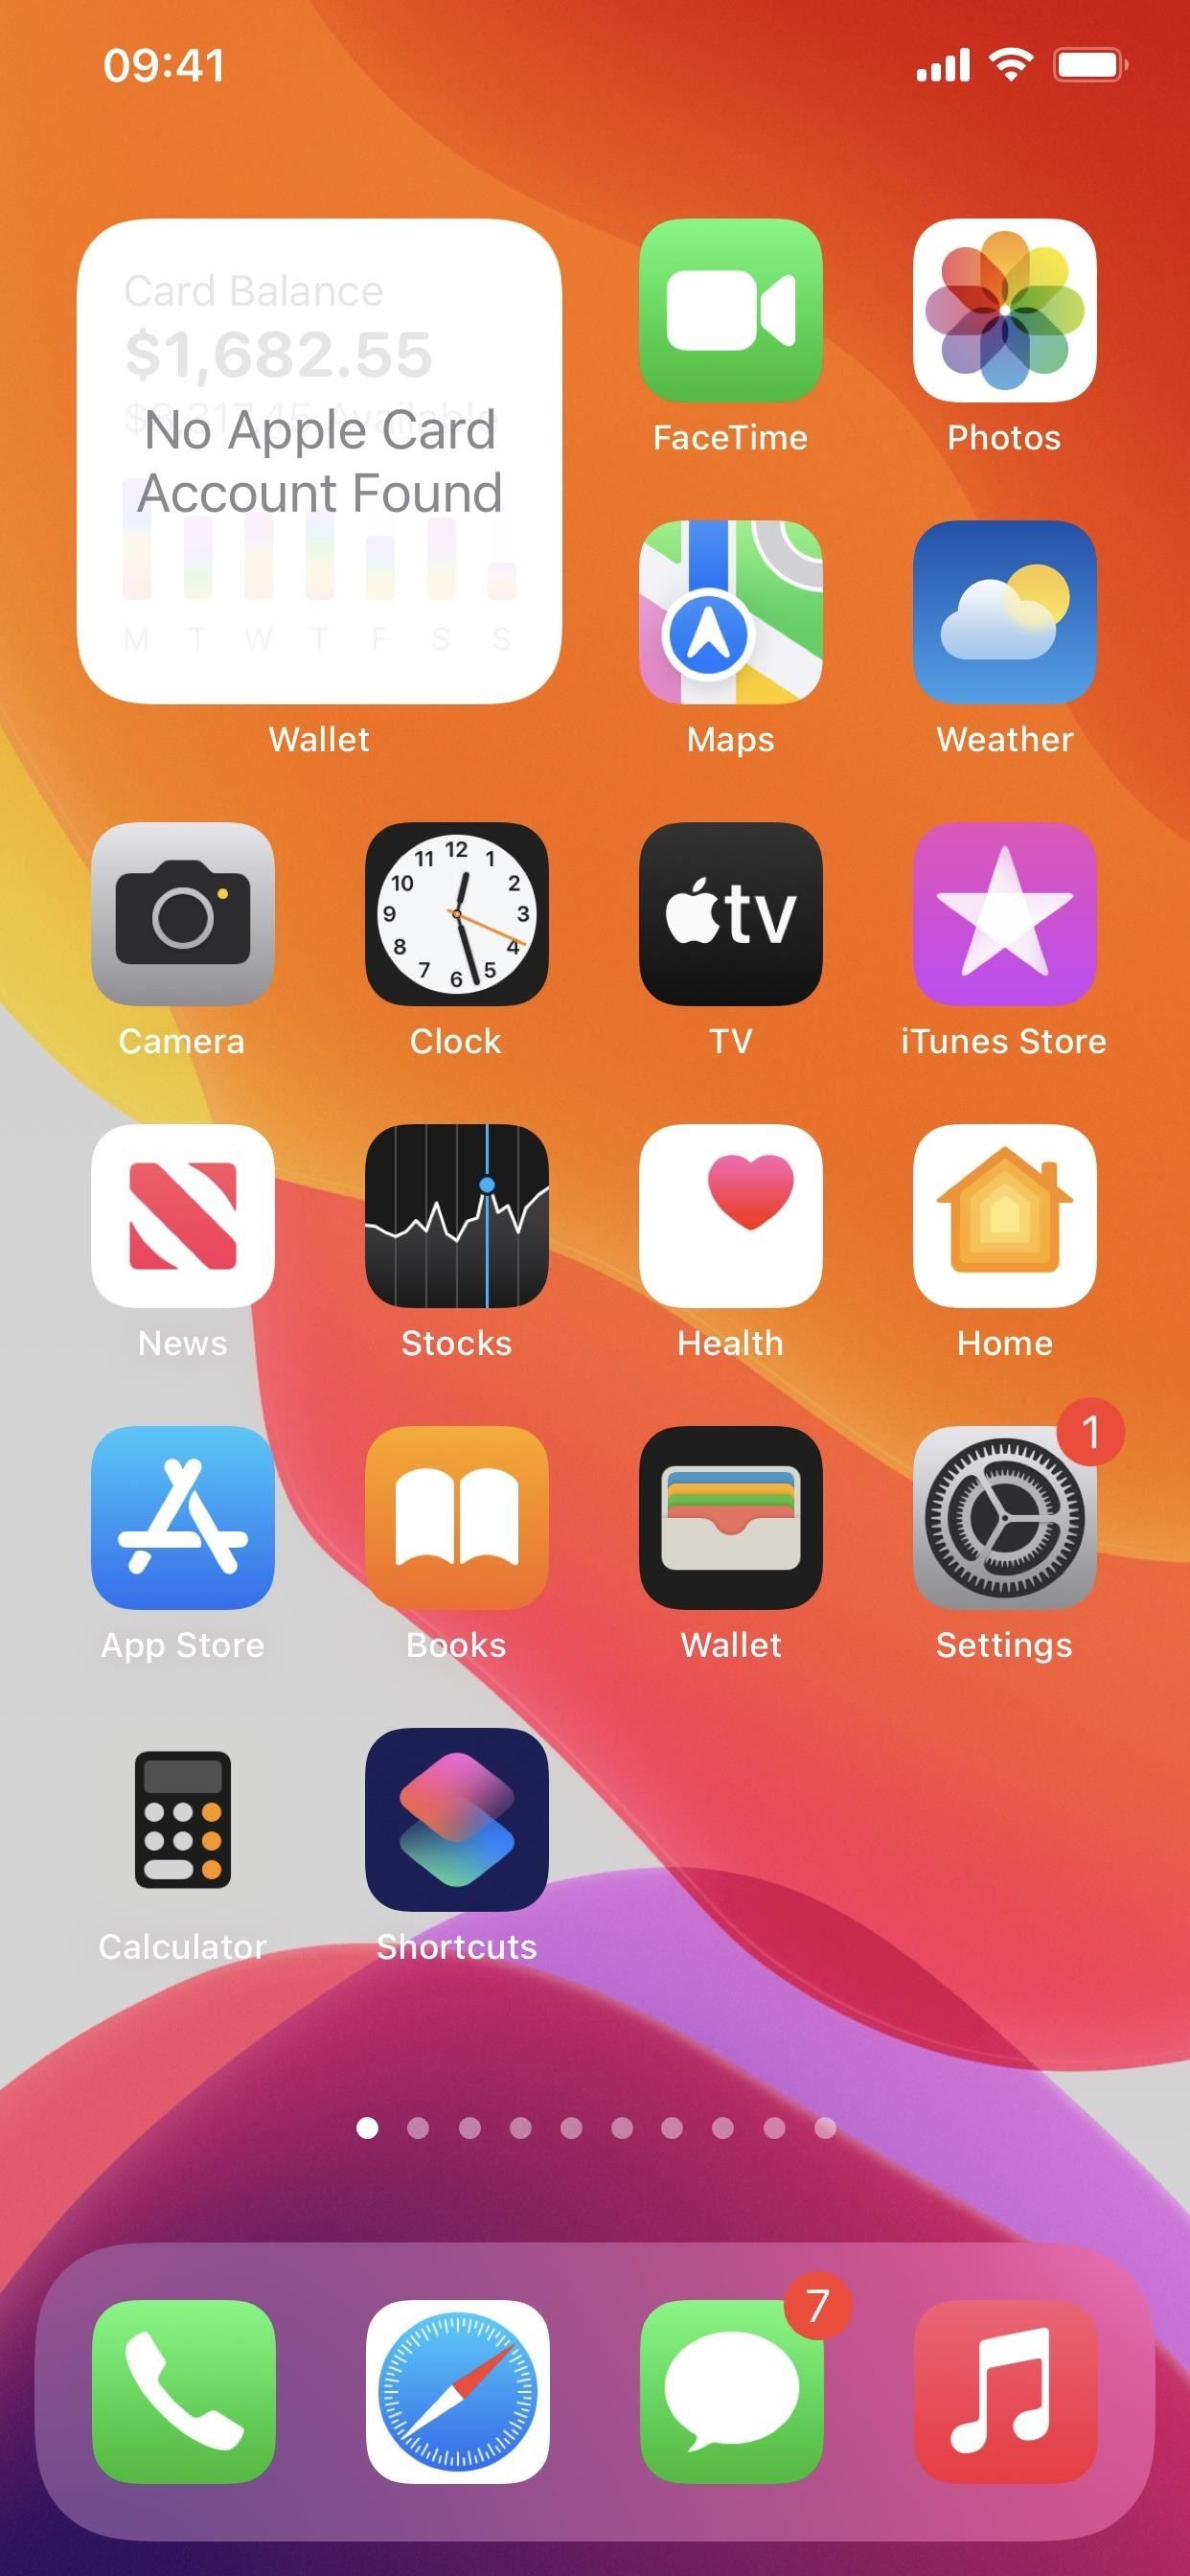 43 Cool New iOS 15.4 Features for iPhone — App Updates, Hidden Changes, and More!